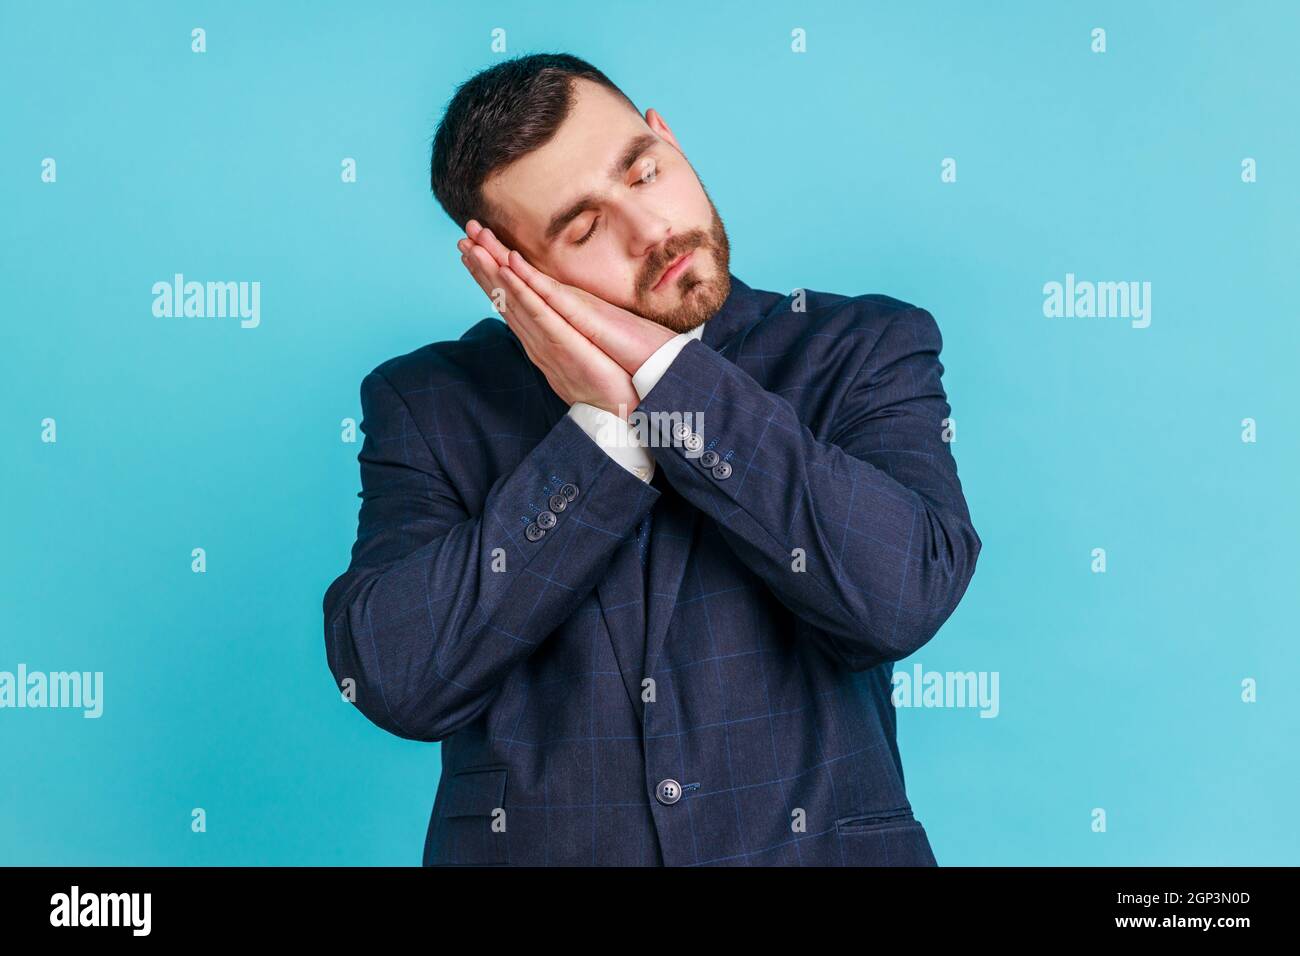 Bedtime. Portrait of handsome bearded man in suit sleeping laying down on her palms and smiling pleased, having comfortable nap and resting, dozing off. Indoor studio shot isolated on blue background. Stock Photo